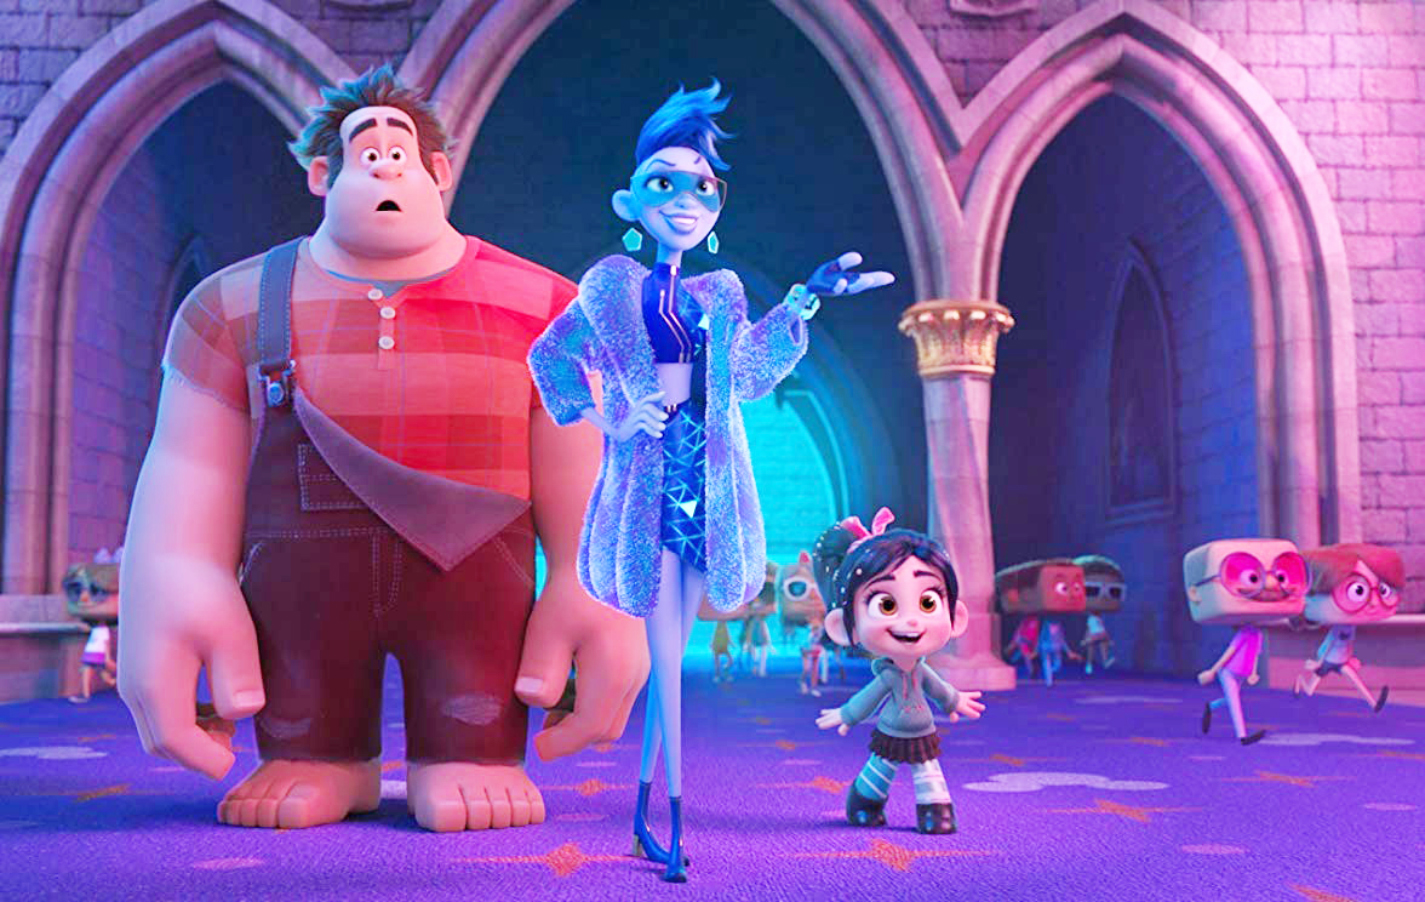 Ralph and Vanellope return as the main characters in Ralph Breaks the Internet which is a follow-up to 2012’s Wreck-It Ralph. The sequel was released in theaters Nov. 21.